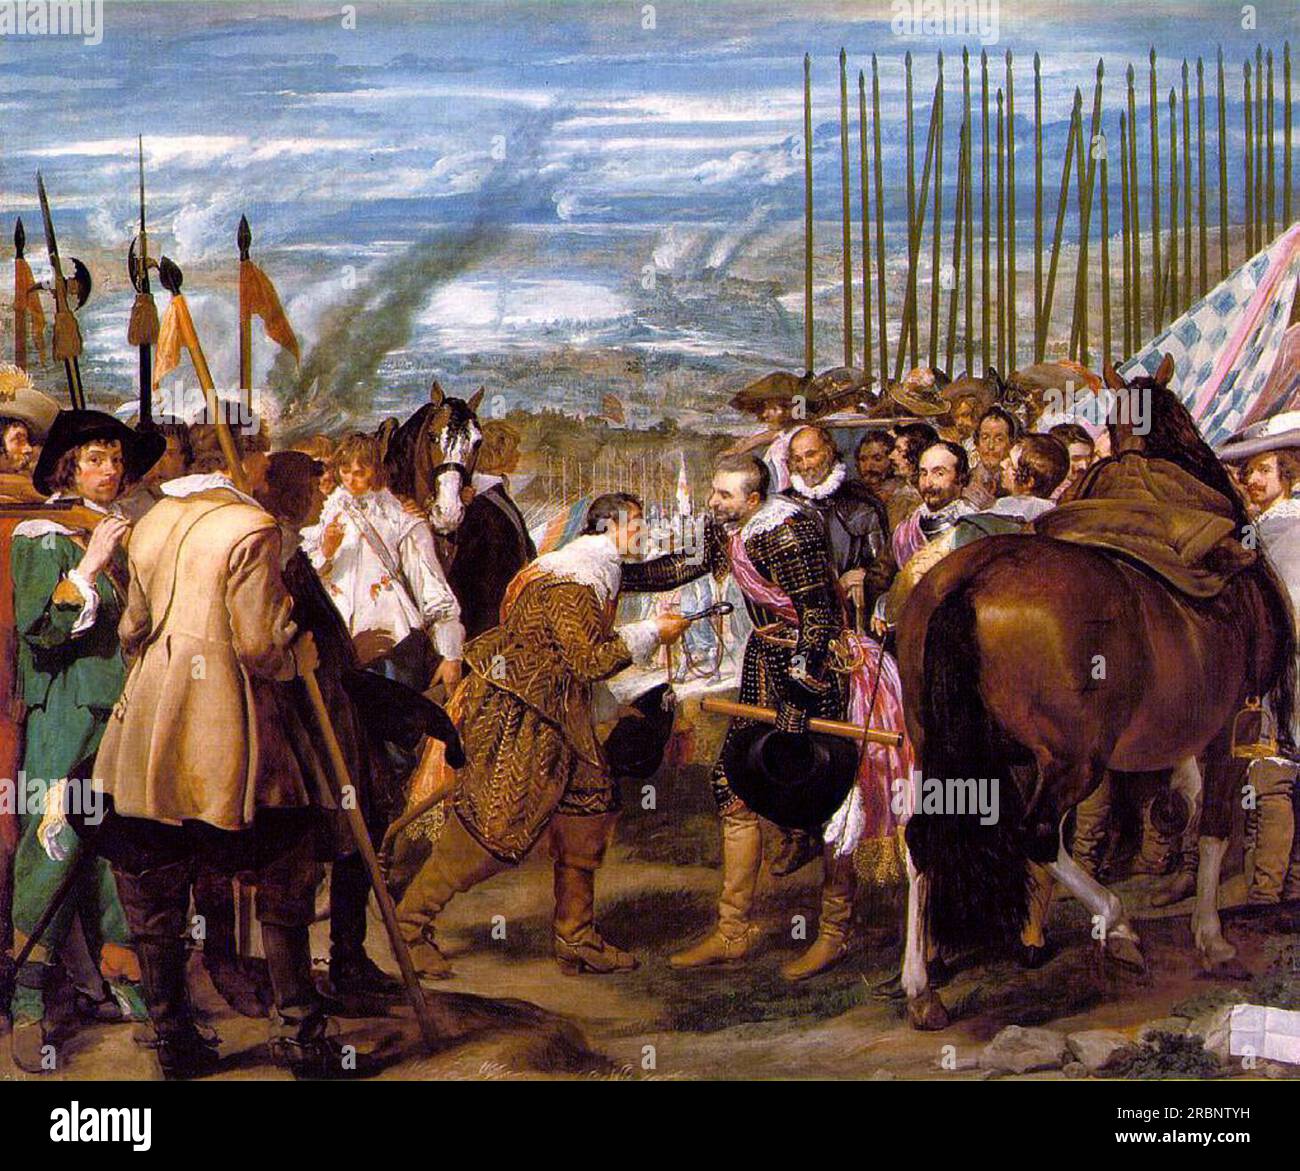 Diego Velázquez, The Surrender of Breda or The Lances (1635)